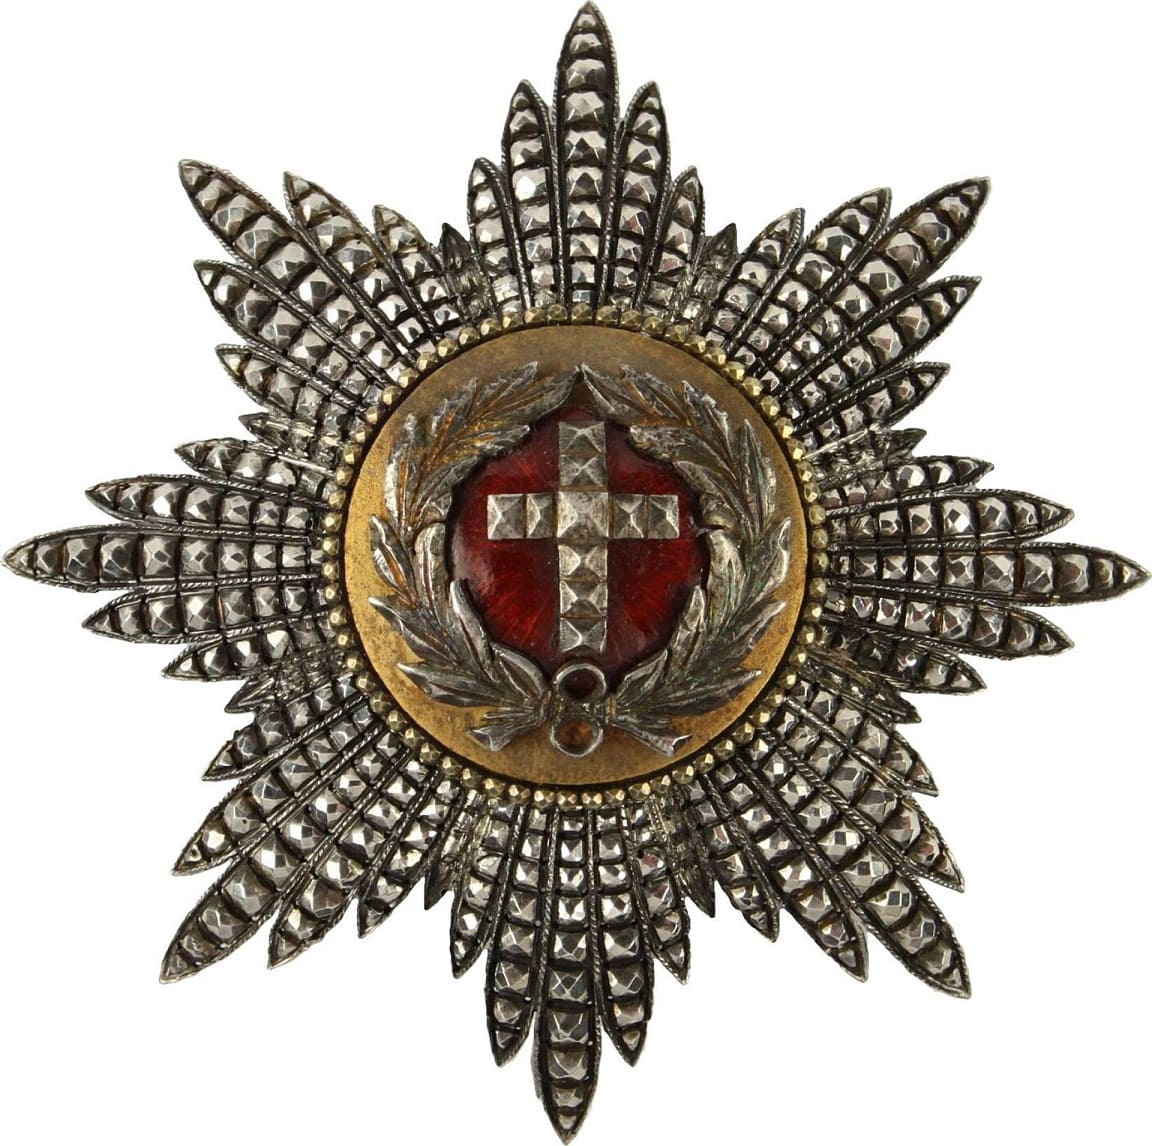 Order of the Elephant Breast Star made by Kretly.jpg